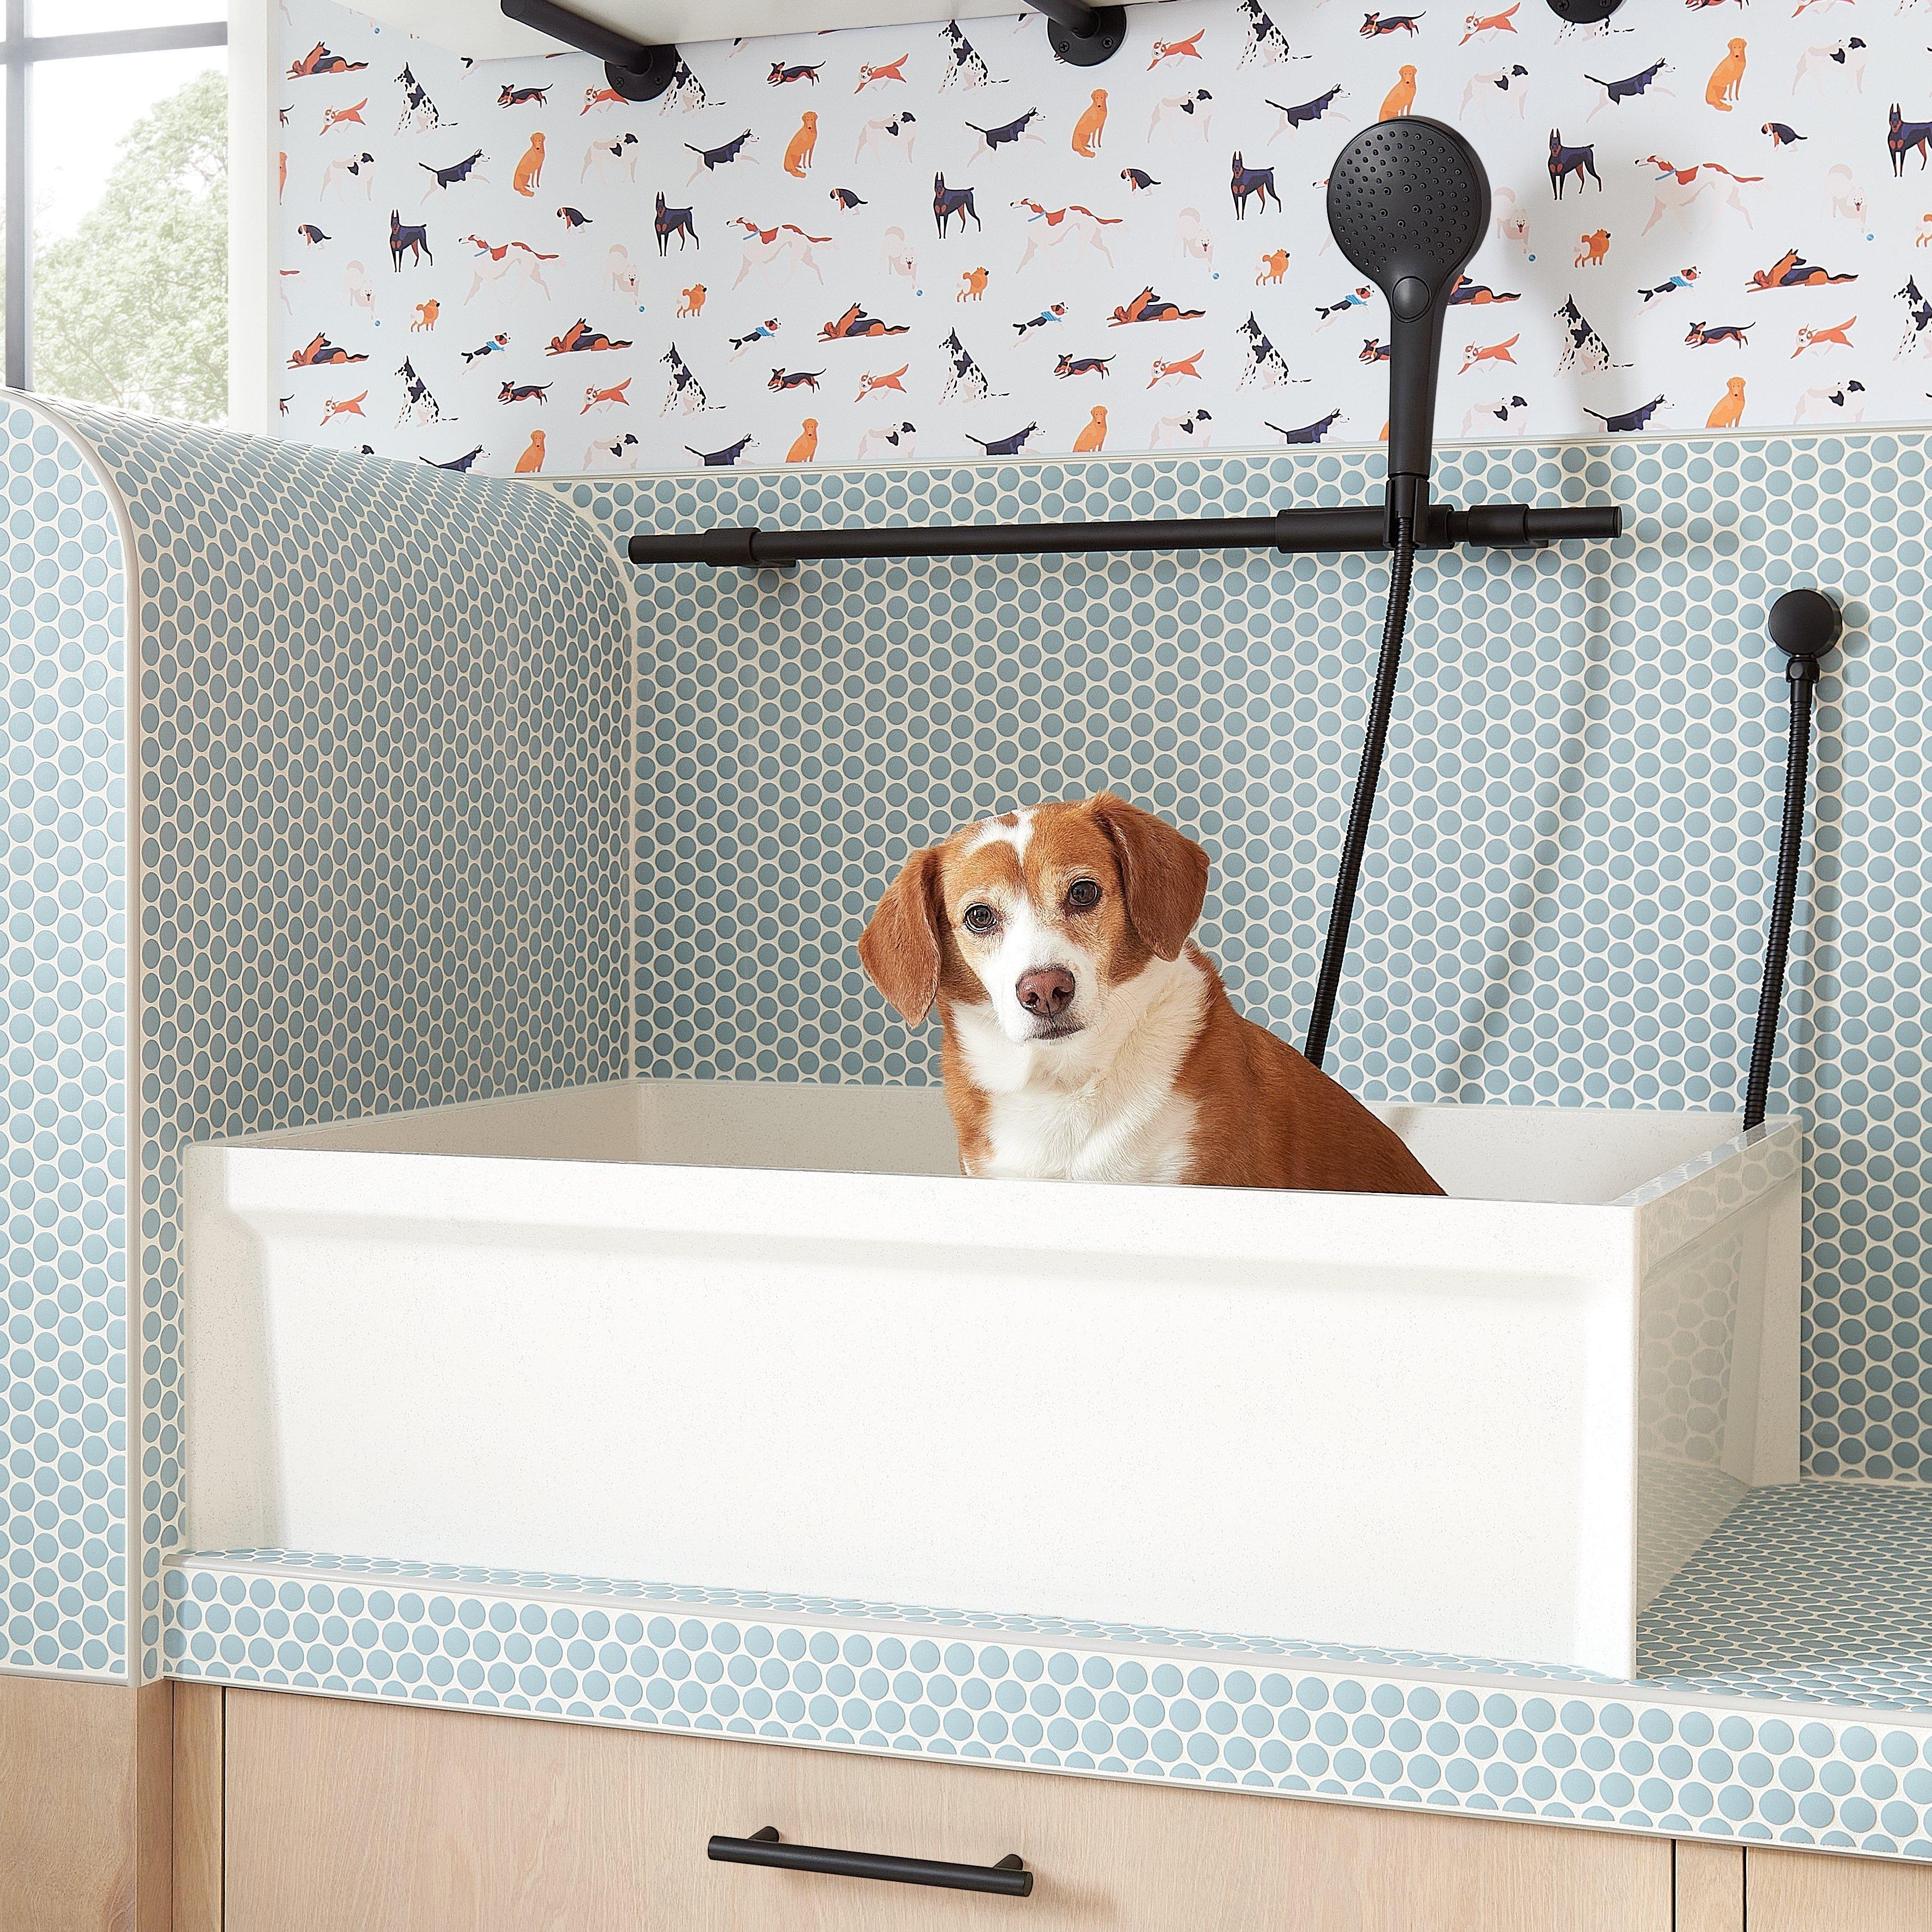 Everything You Need to Know About a Home Dog Bath Tub